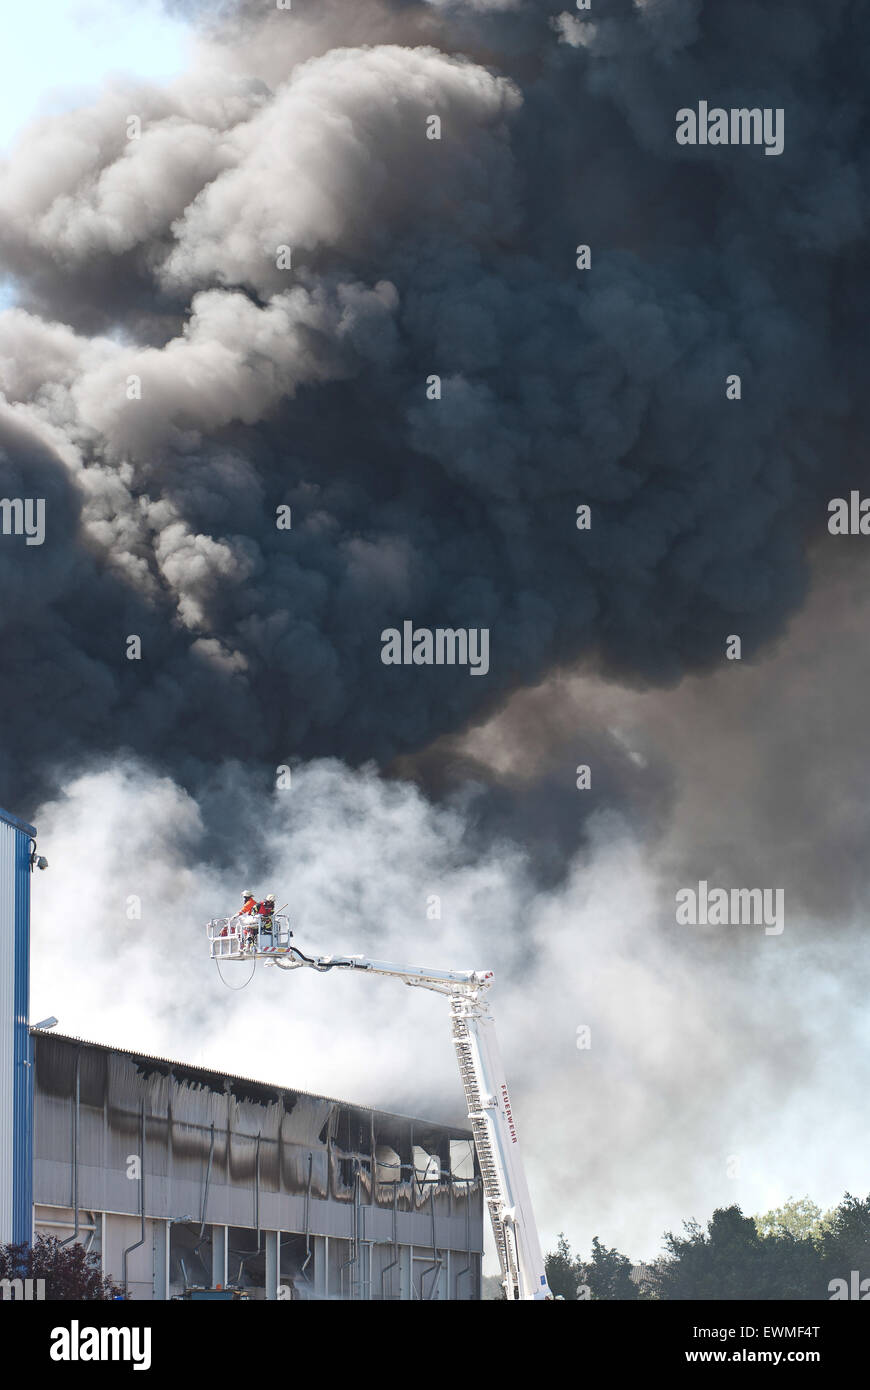 Firemen on aerial ladder platform in front of big cloud of smoke, Industrial Area Melbeck, Lower Saxony, Germany Stock Photo